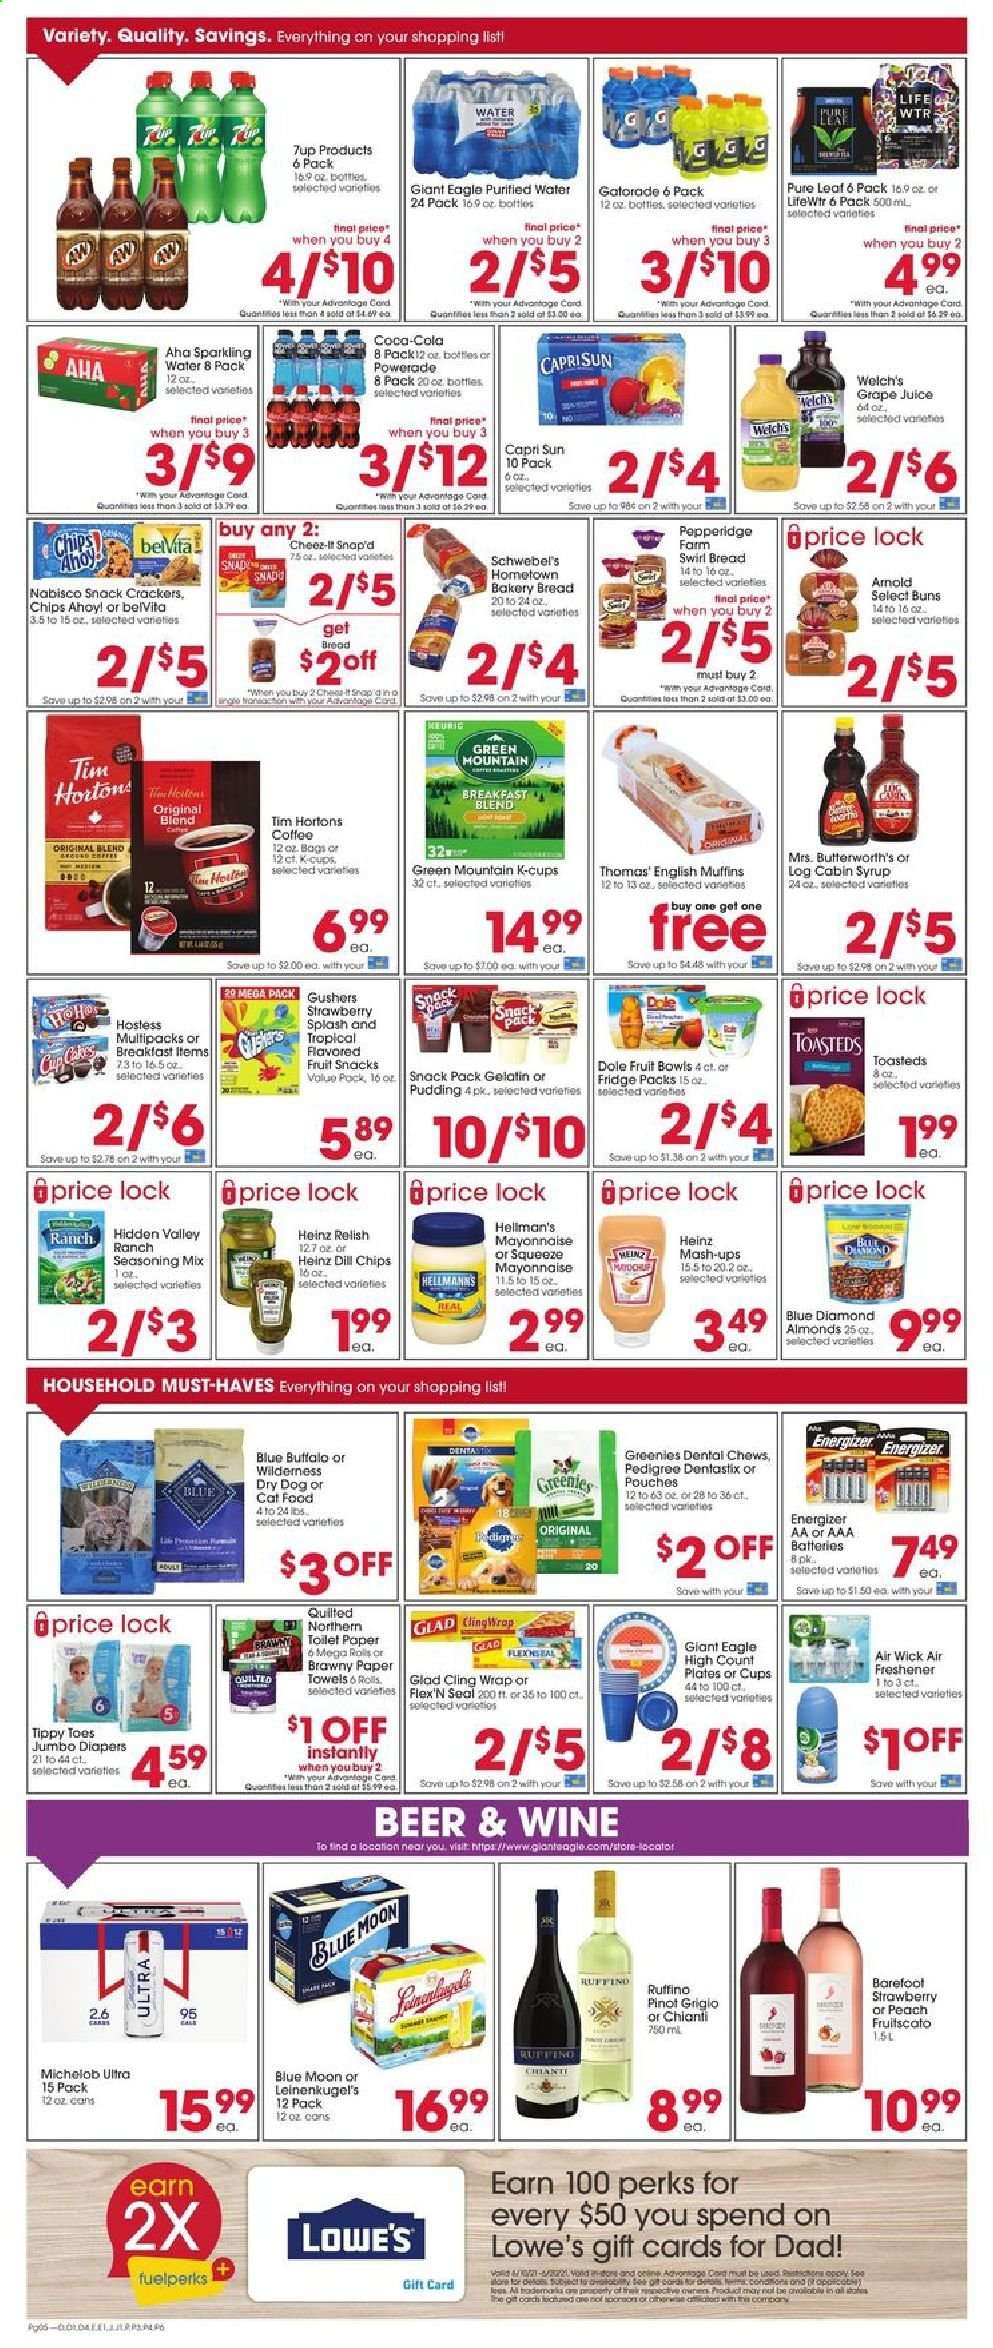 thumbnail - Giant Eagle Flyer - 06/10/2021 - 06/16/2021 - Sales products - Blue Moon, Michelob, bread, english muffins, buns, Dole, Welch's, cod, pudding, mayonnaise, crackers, fruit snack, Chips Ahoy!, chips, Heinz, belVita, dill, spice, syrup, almonds, Blue Diamond, Capri Sun, Coca-Cola, Powerade, juice, 7UP, Gatorade, sparkling water, purified water, Lifewtr, Pure Leaf, coffee capsules, K-Cups, Green Mountain, white wine, wine, Pinot Grigio, Fruitscato, beer, nappies, toilet paper, kitchen towels, paper towels, plate, air freshener, Air Wick, Energizer, Greenies, animal food, cat food, Dentastix, Pedigree, gelatin, car battery, Leinenkugel's. Page 4.